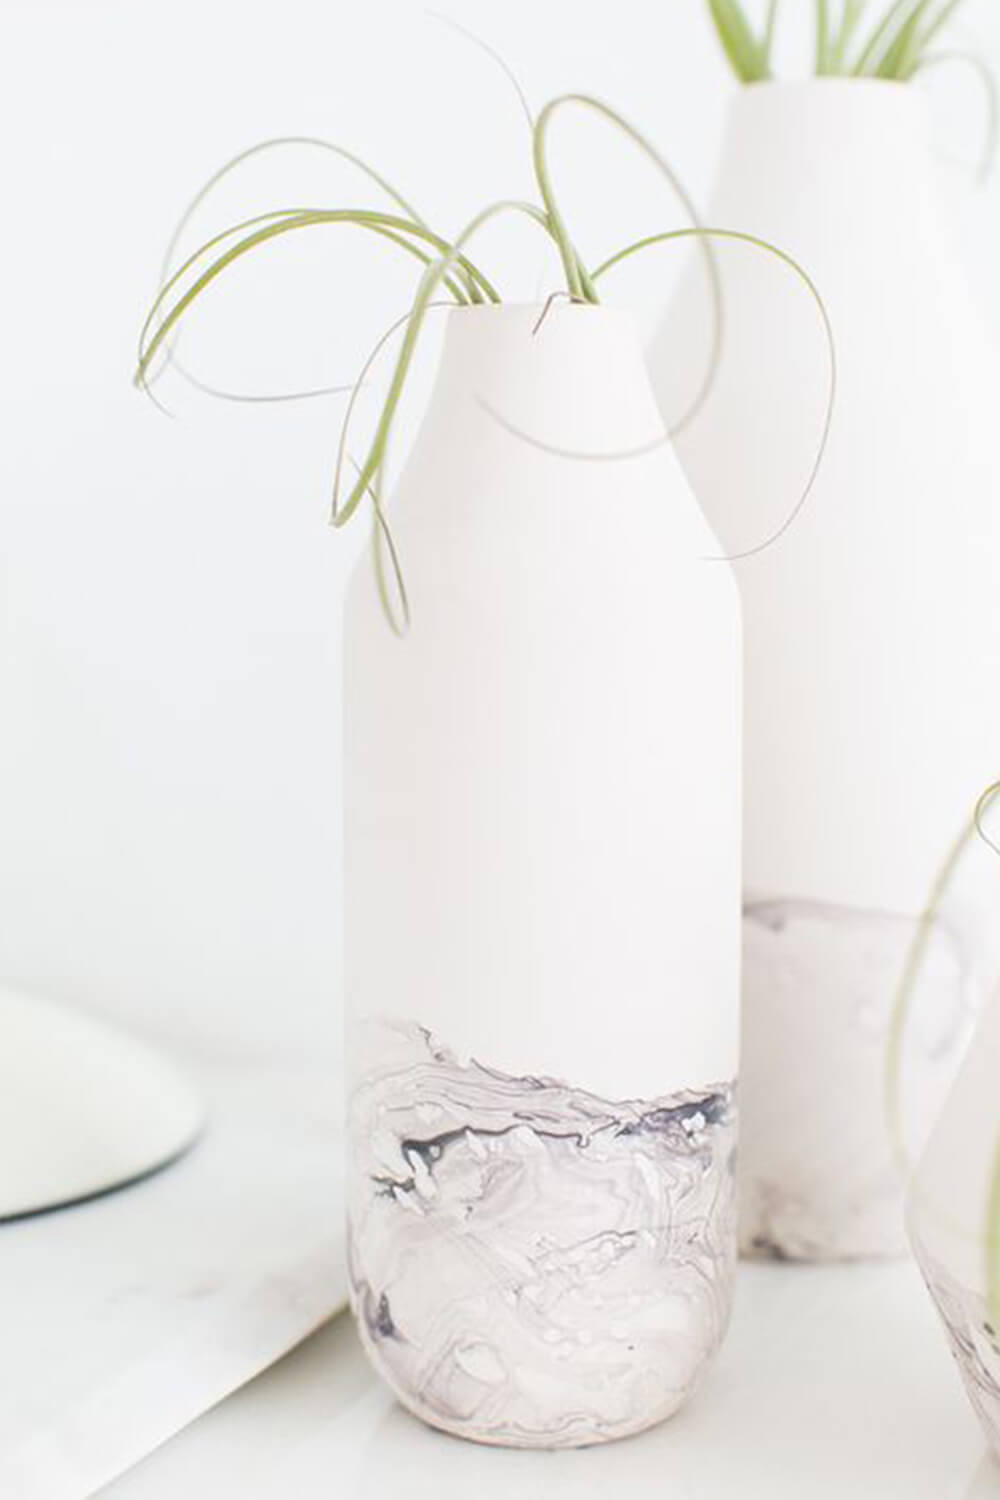 Marble Dipped Ceramic Bottle Upcycle